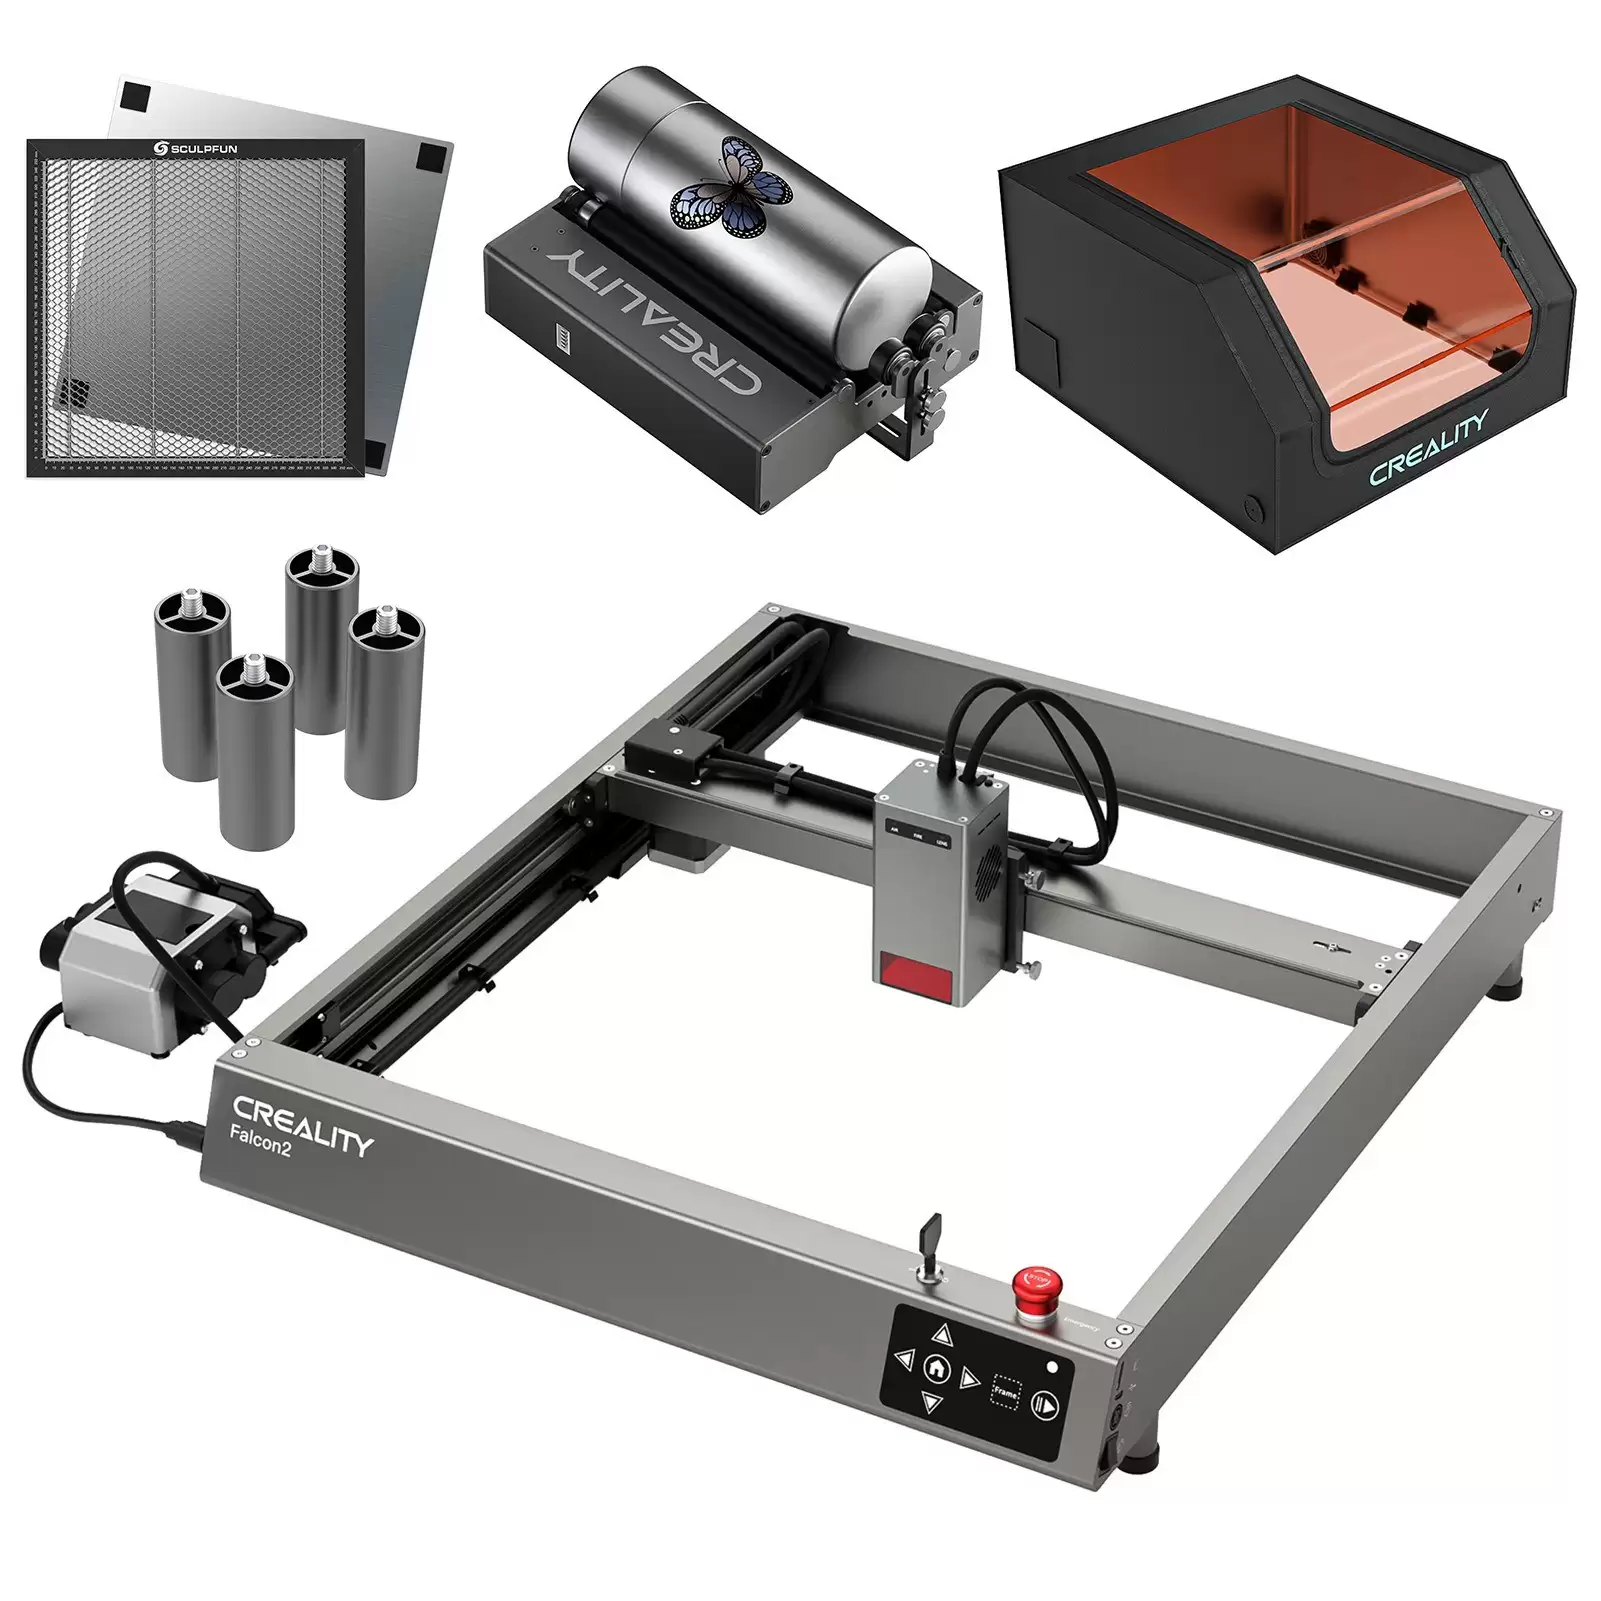 Pay Only $729 For Creality Falcon2 22w Laser Engraver With This Discount Coupon At Cafago